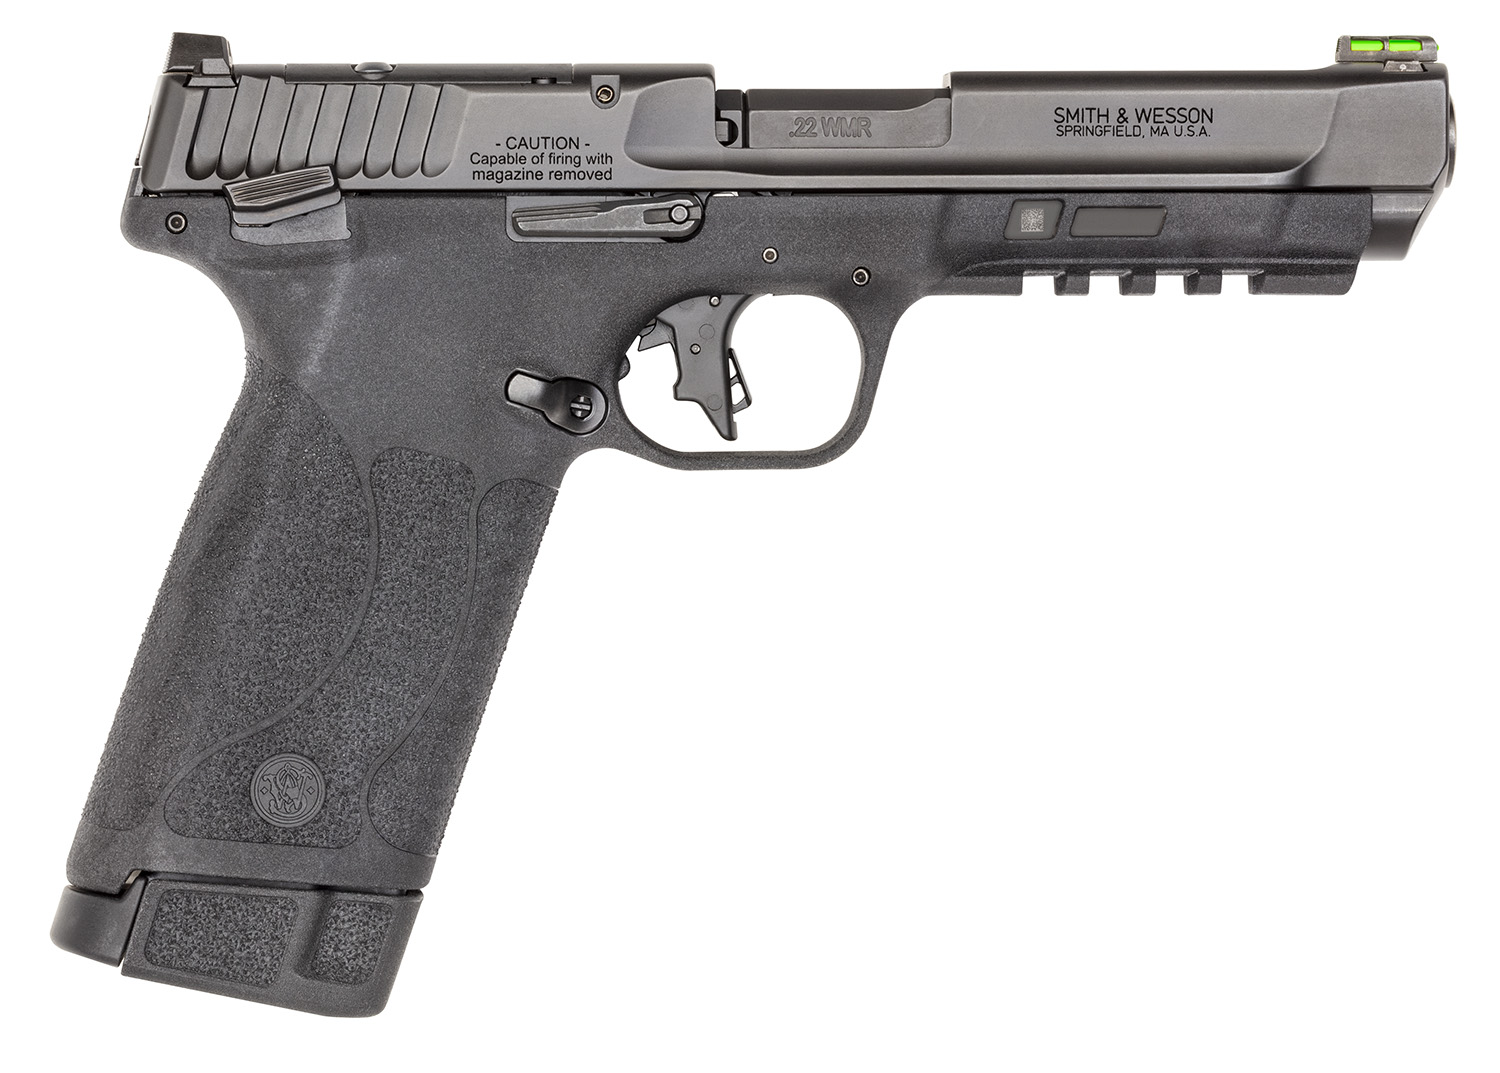 S&amp;W M&amp;P22        13433  MAG 22WMR 4.35 OR TS   30R